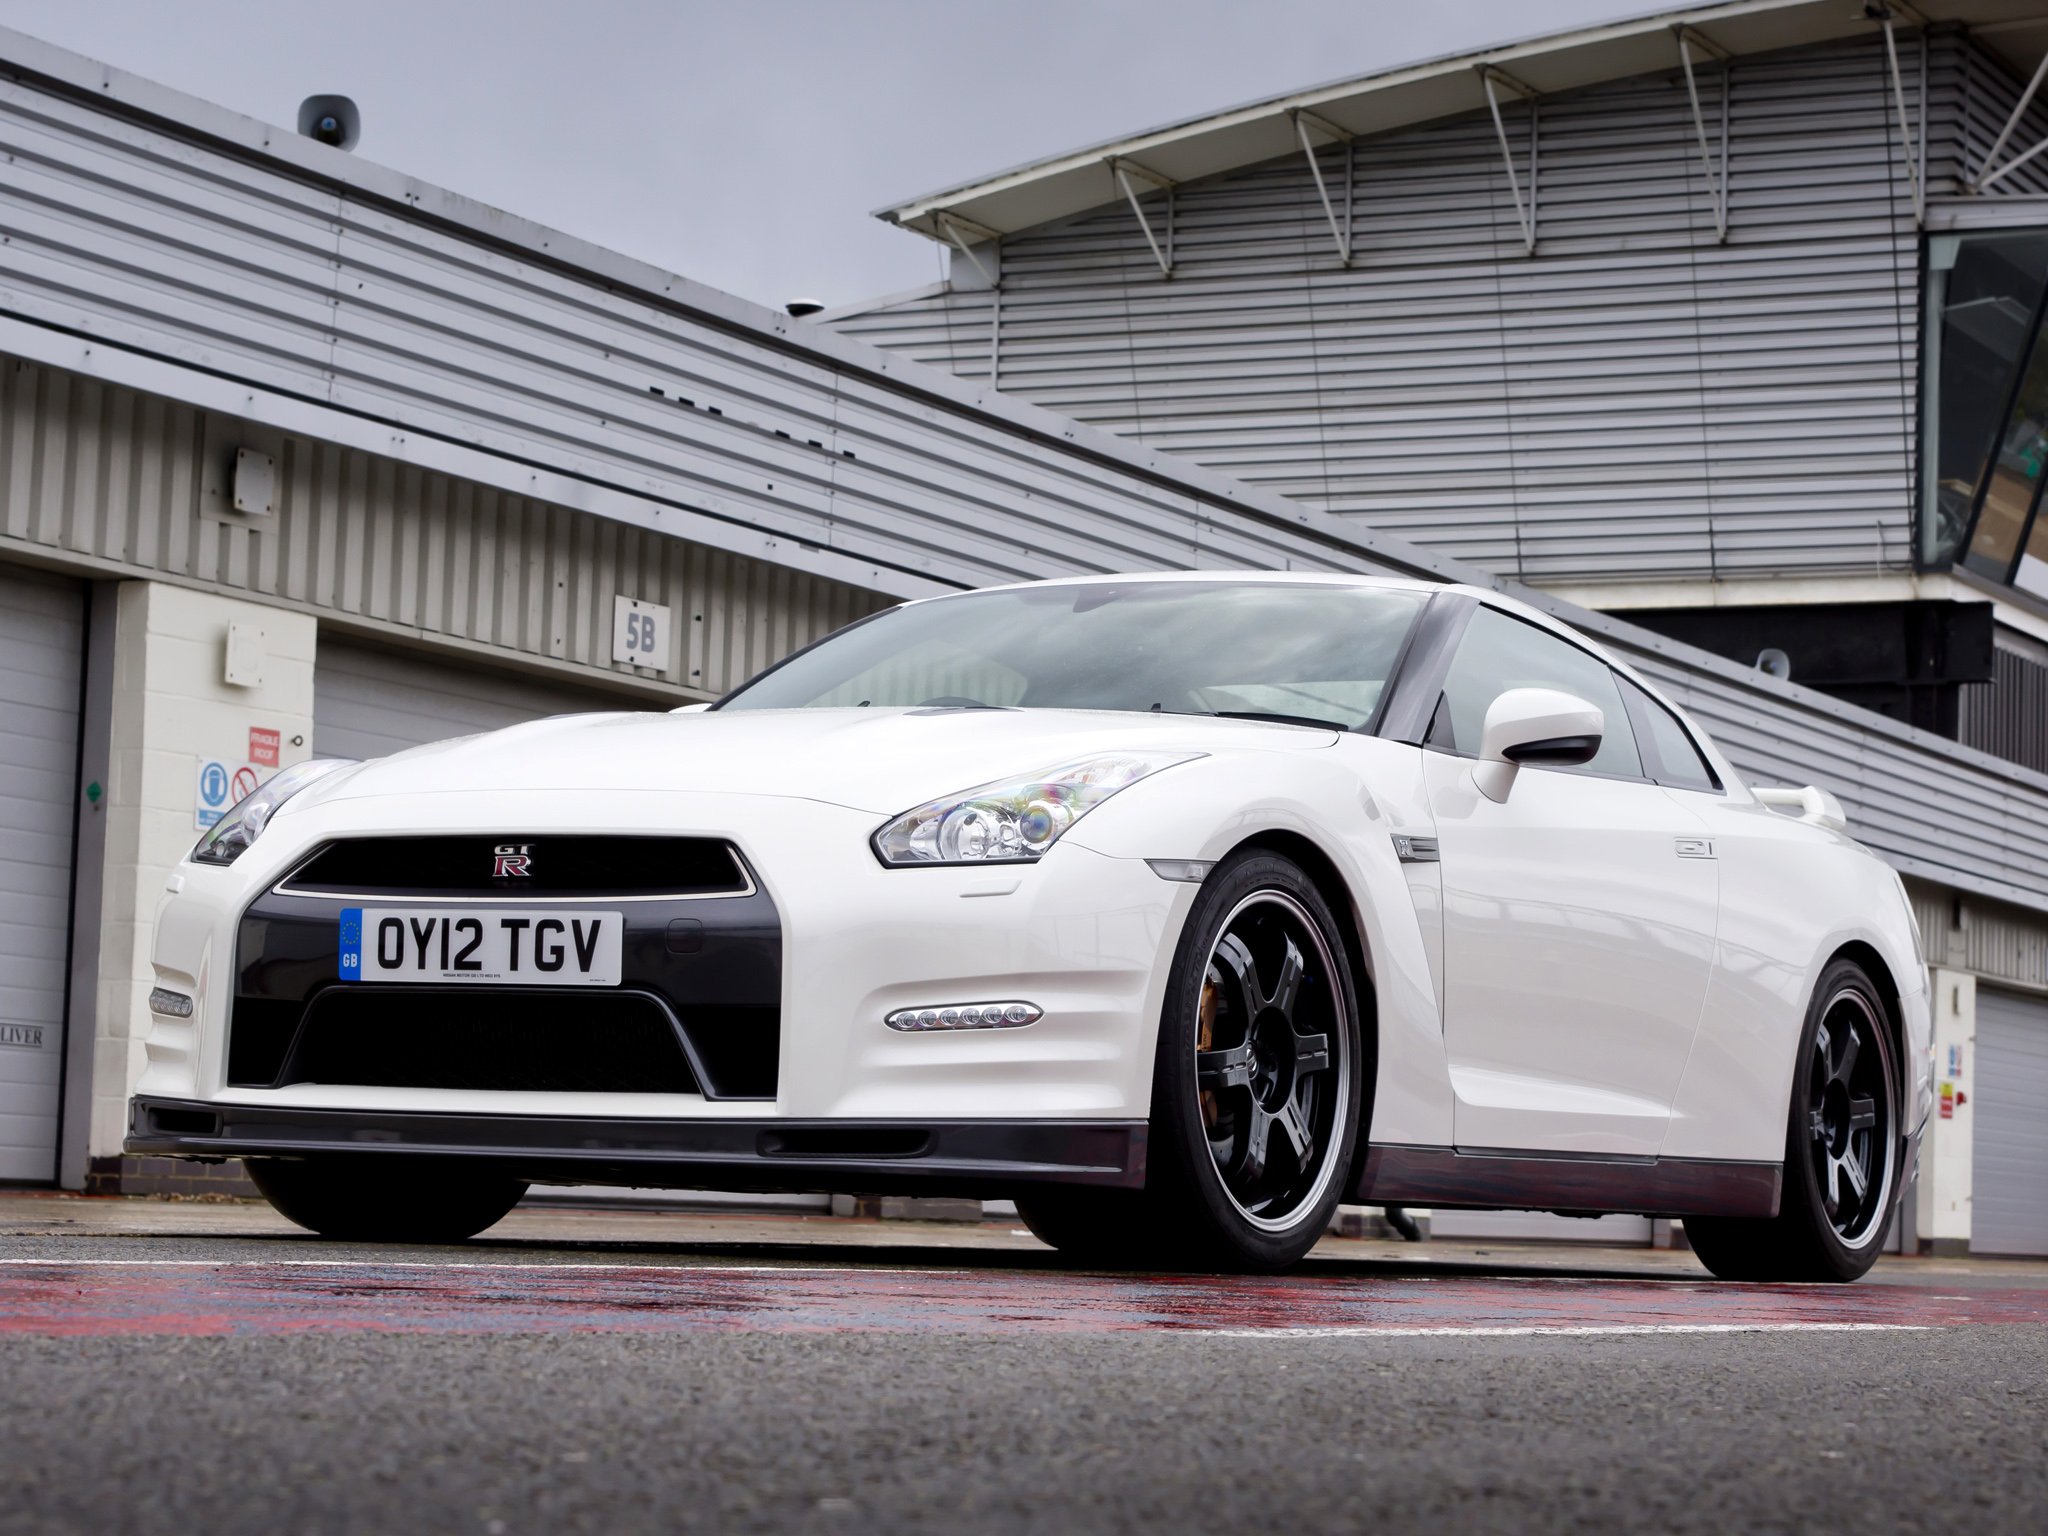 nissan, Gt r, Pure, Edition, For, Track, Pack, Uk spec, R35, Cars, Coupe, 2012 Wallpaper